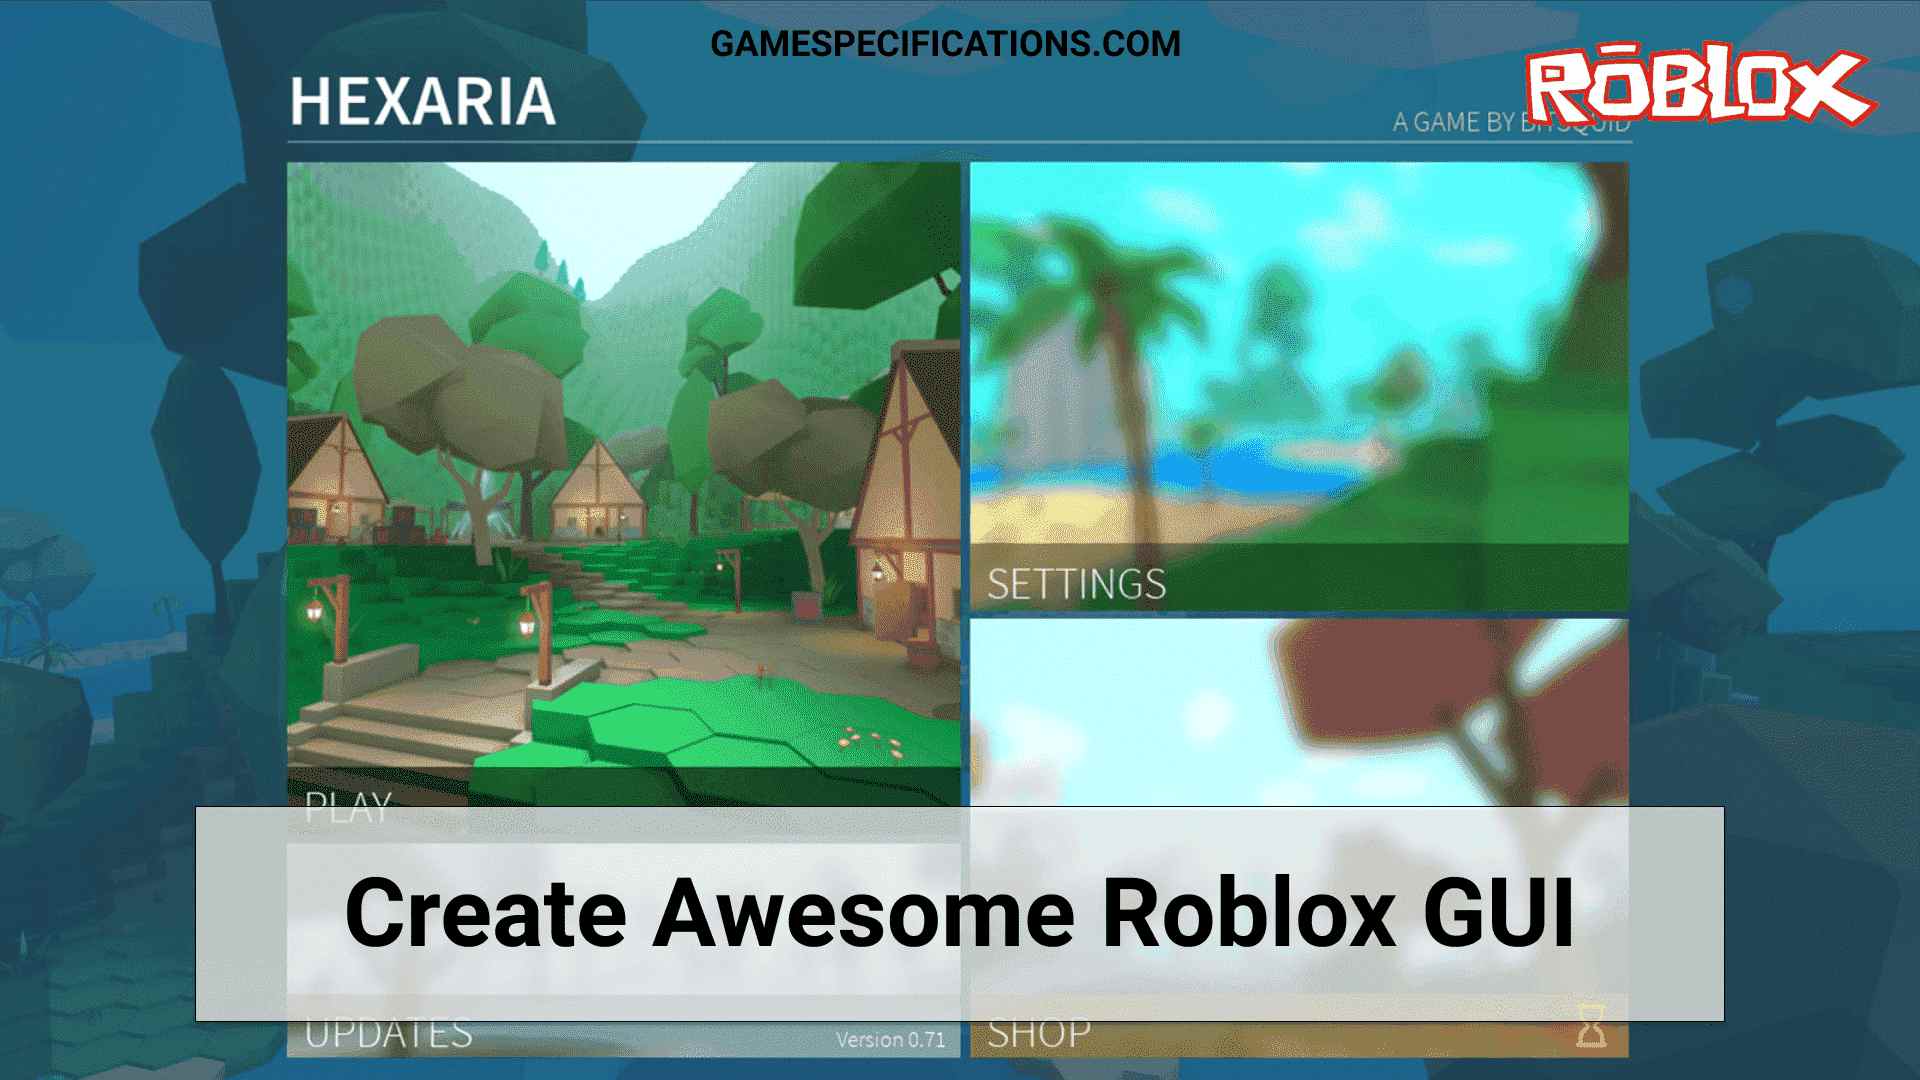 Roblox Gui All In One Guide To Create An Awesome Gui Game Specifications - roblox nametag color id